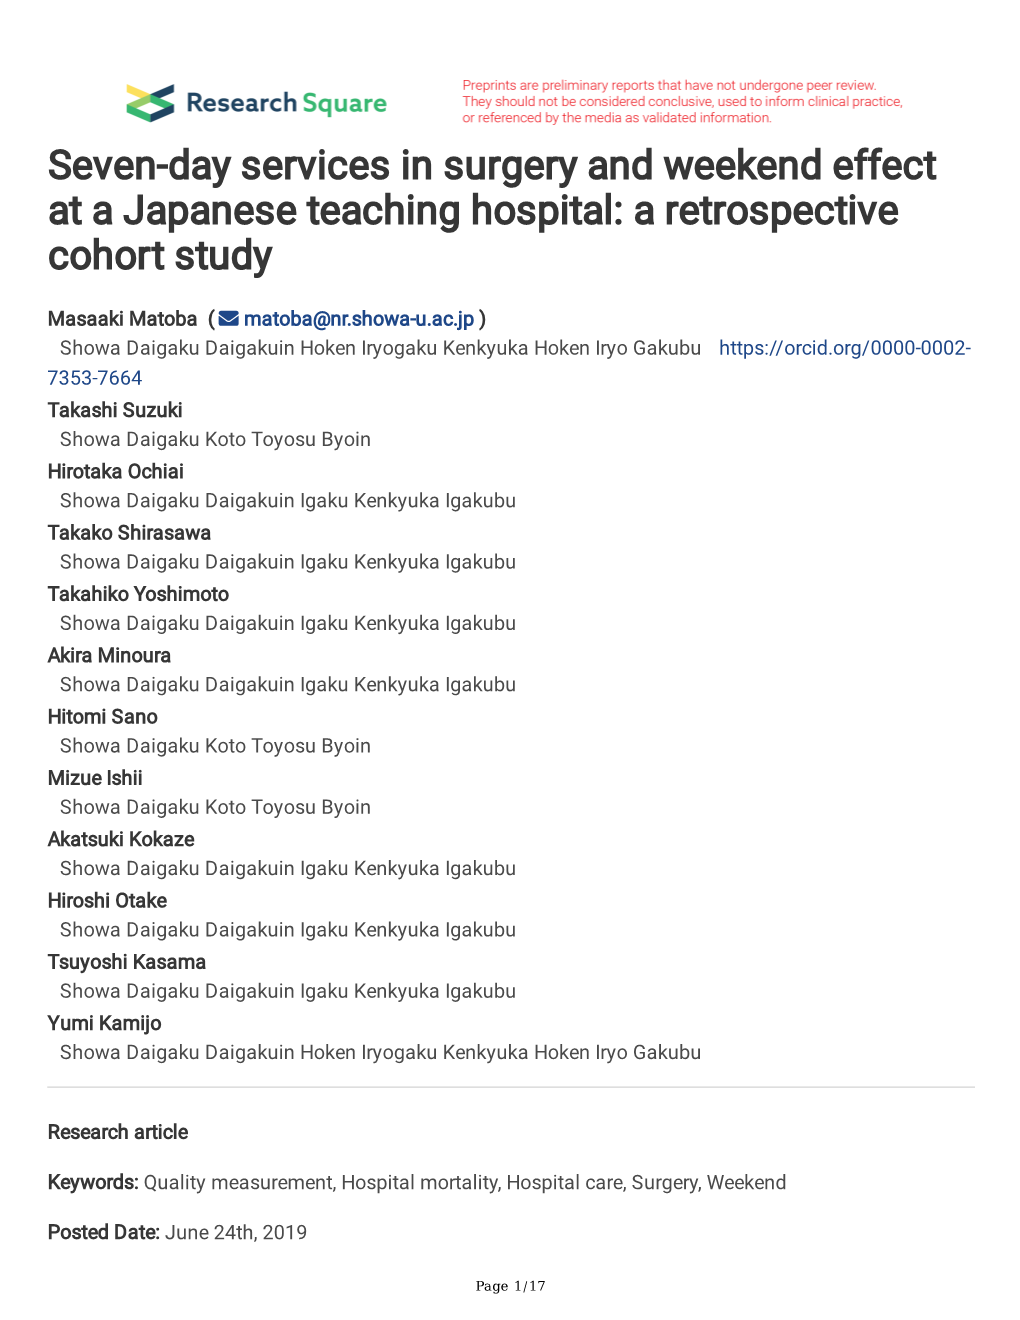 Seven-Day Services in Surgery and Weekend Effect at a Japanese Teaching Hospital: a Retrospective Cohort Study